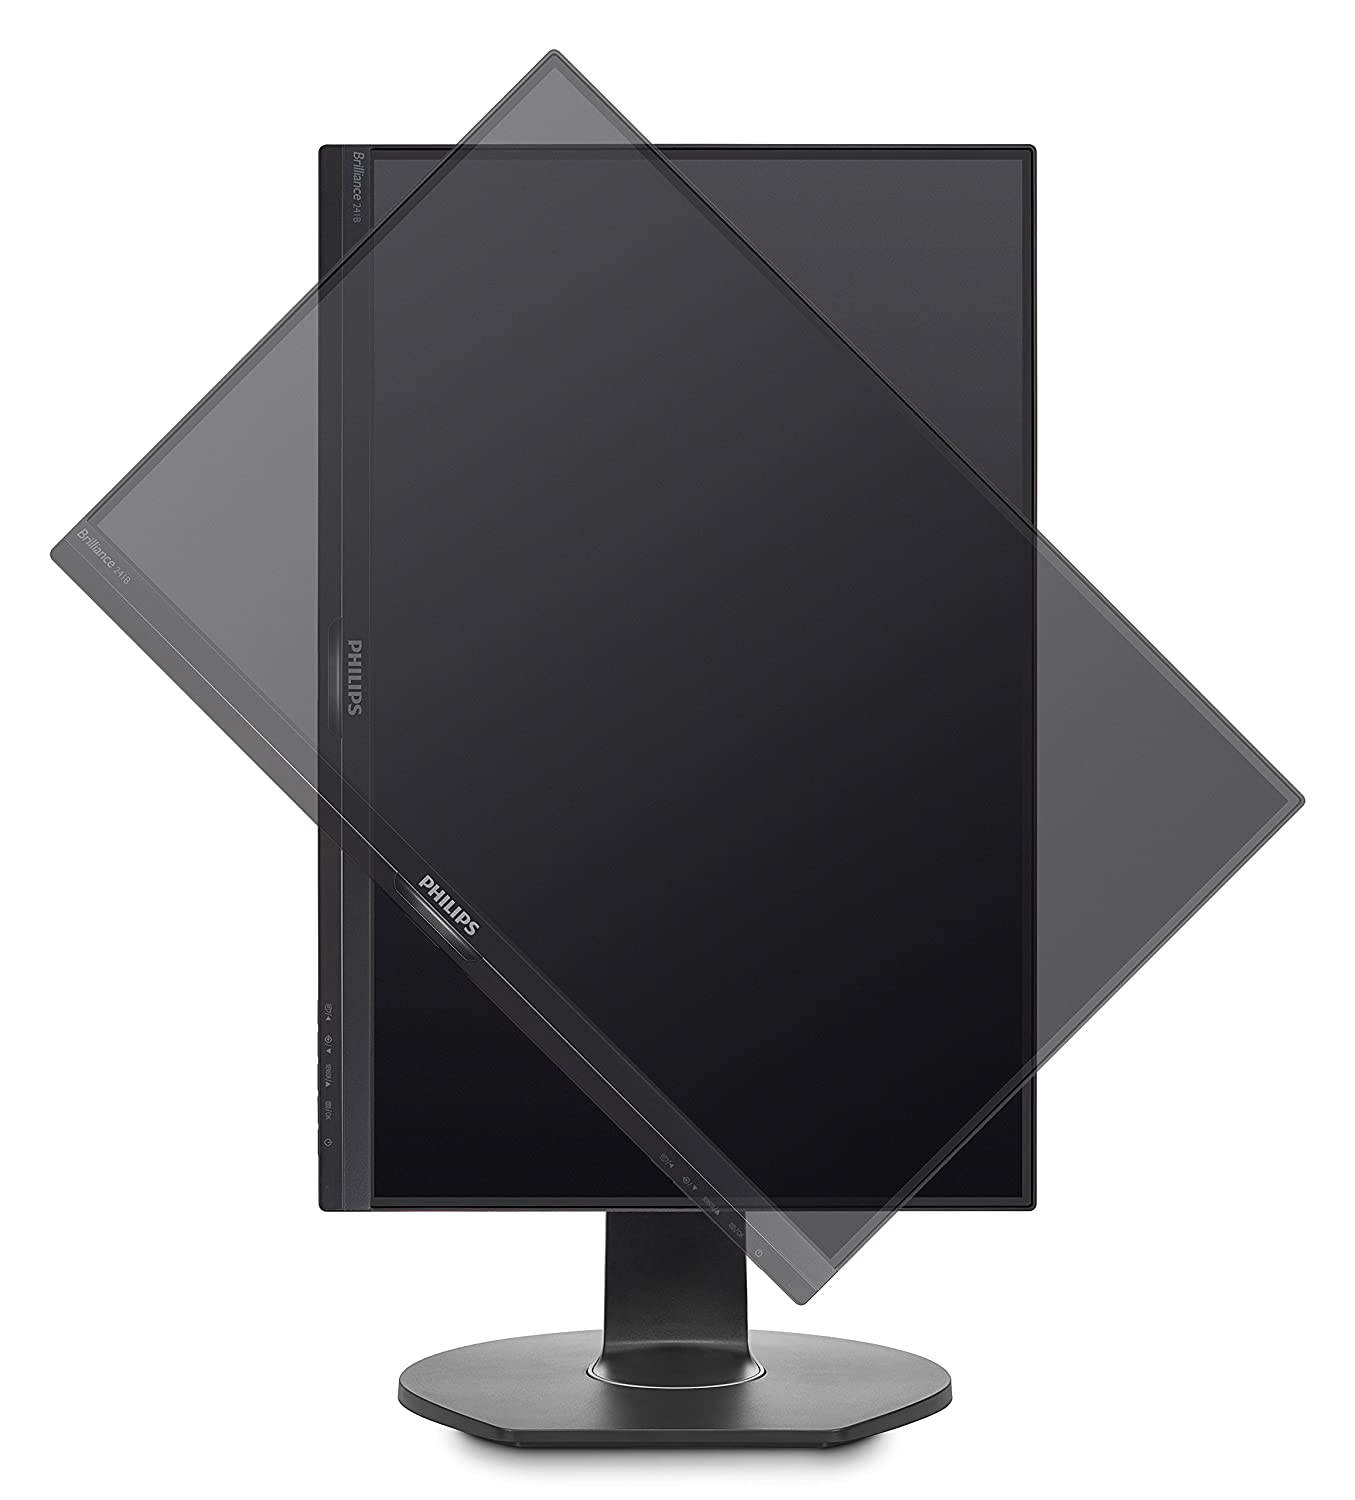 Philips 241B7QPJKEB LCD Monitor With LED Backlight,Pop-Up Webcam 23.8